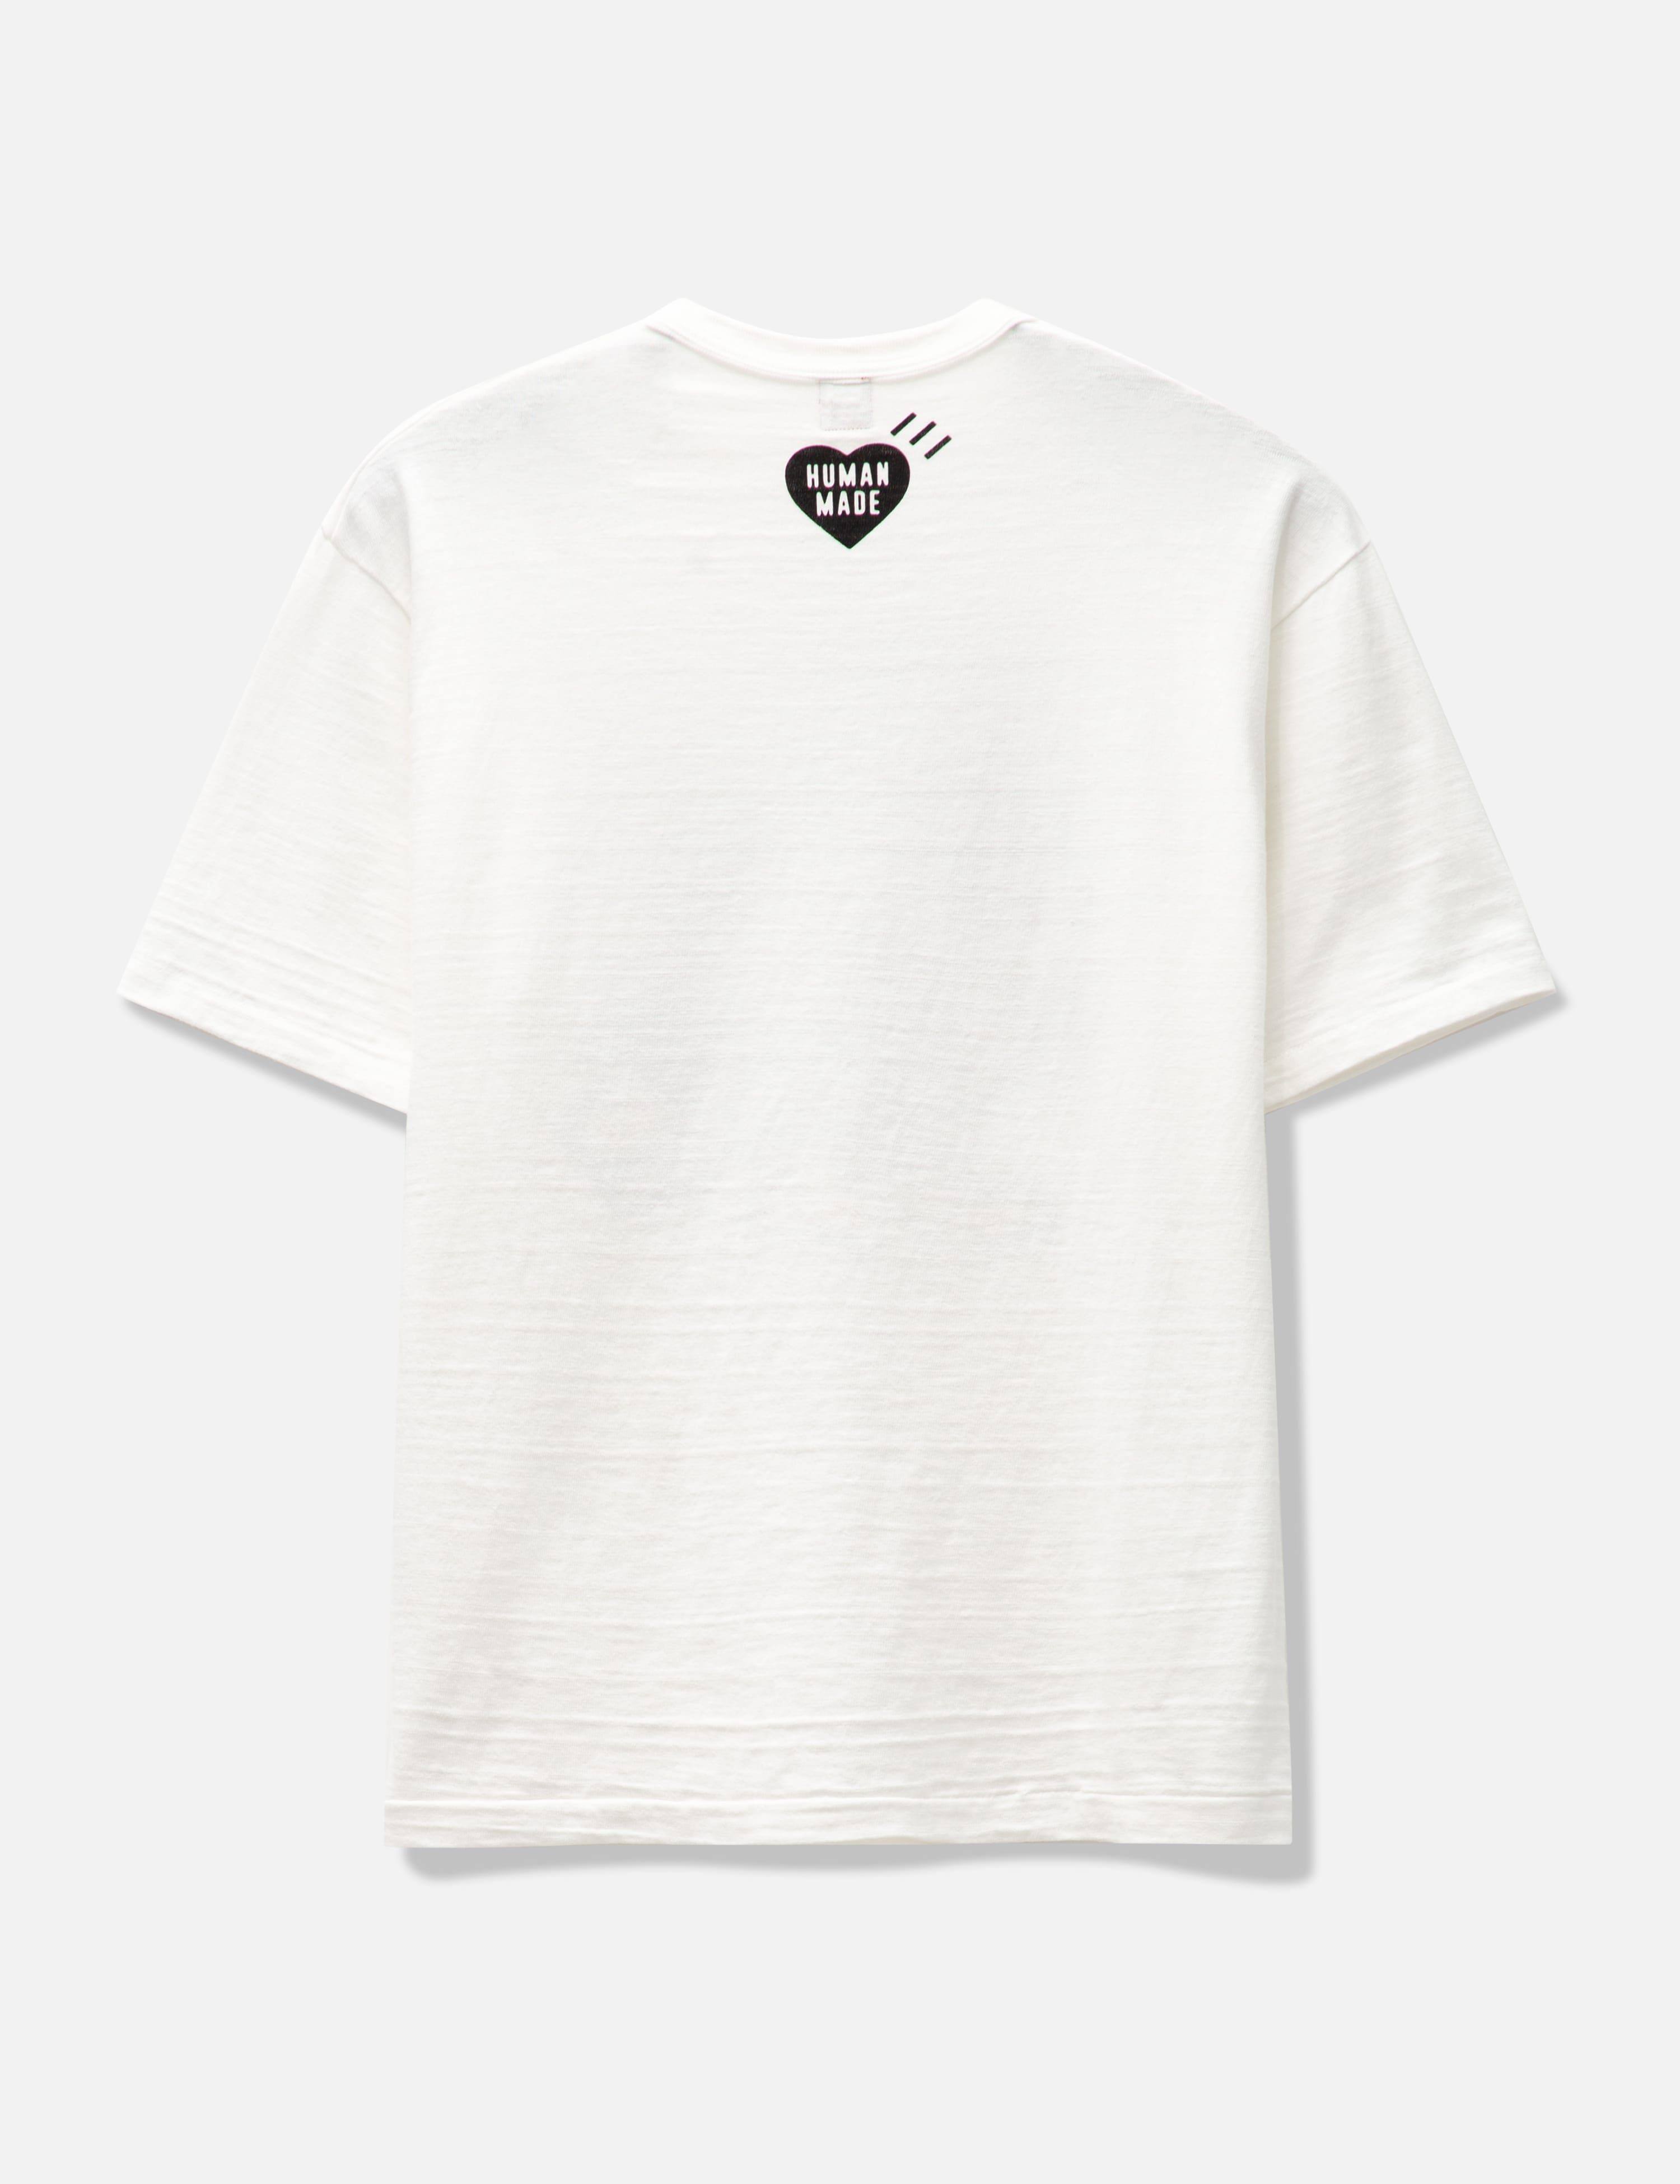 Human Made - GRAPHIC T-SHIRT #04 | HBX - Globally Curated Fashion